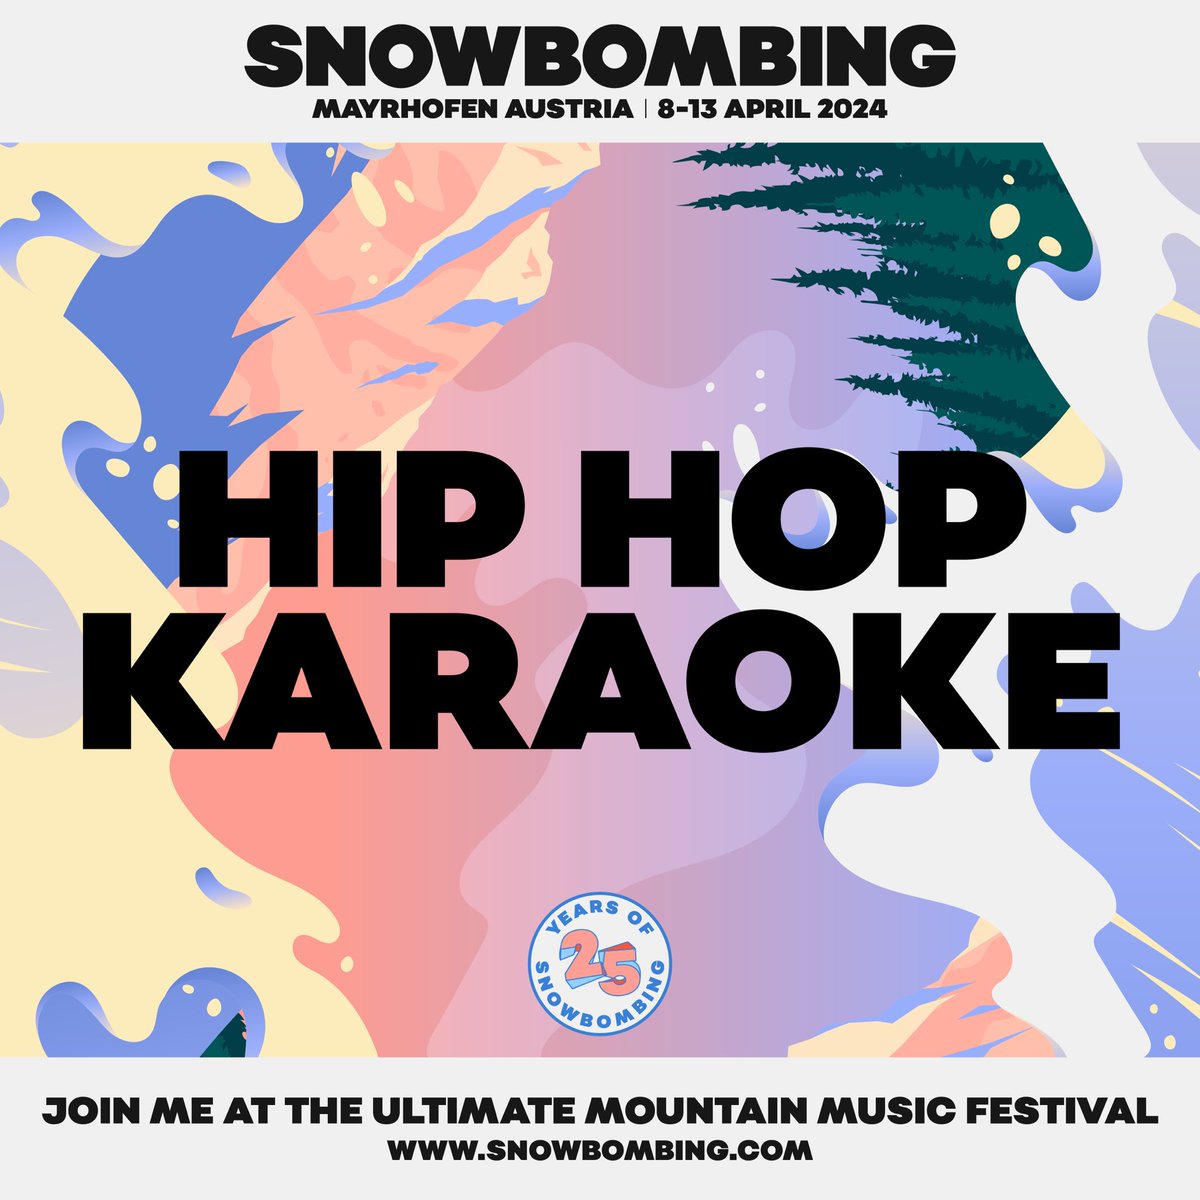 Ahhh yeahhh we’re at the legendary @Snowbombing on 2024!!! Super excited to be joining an amazing line-up and for YOU to live out your rap fantasies live on the slopes! 🔥 🎤